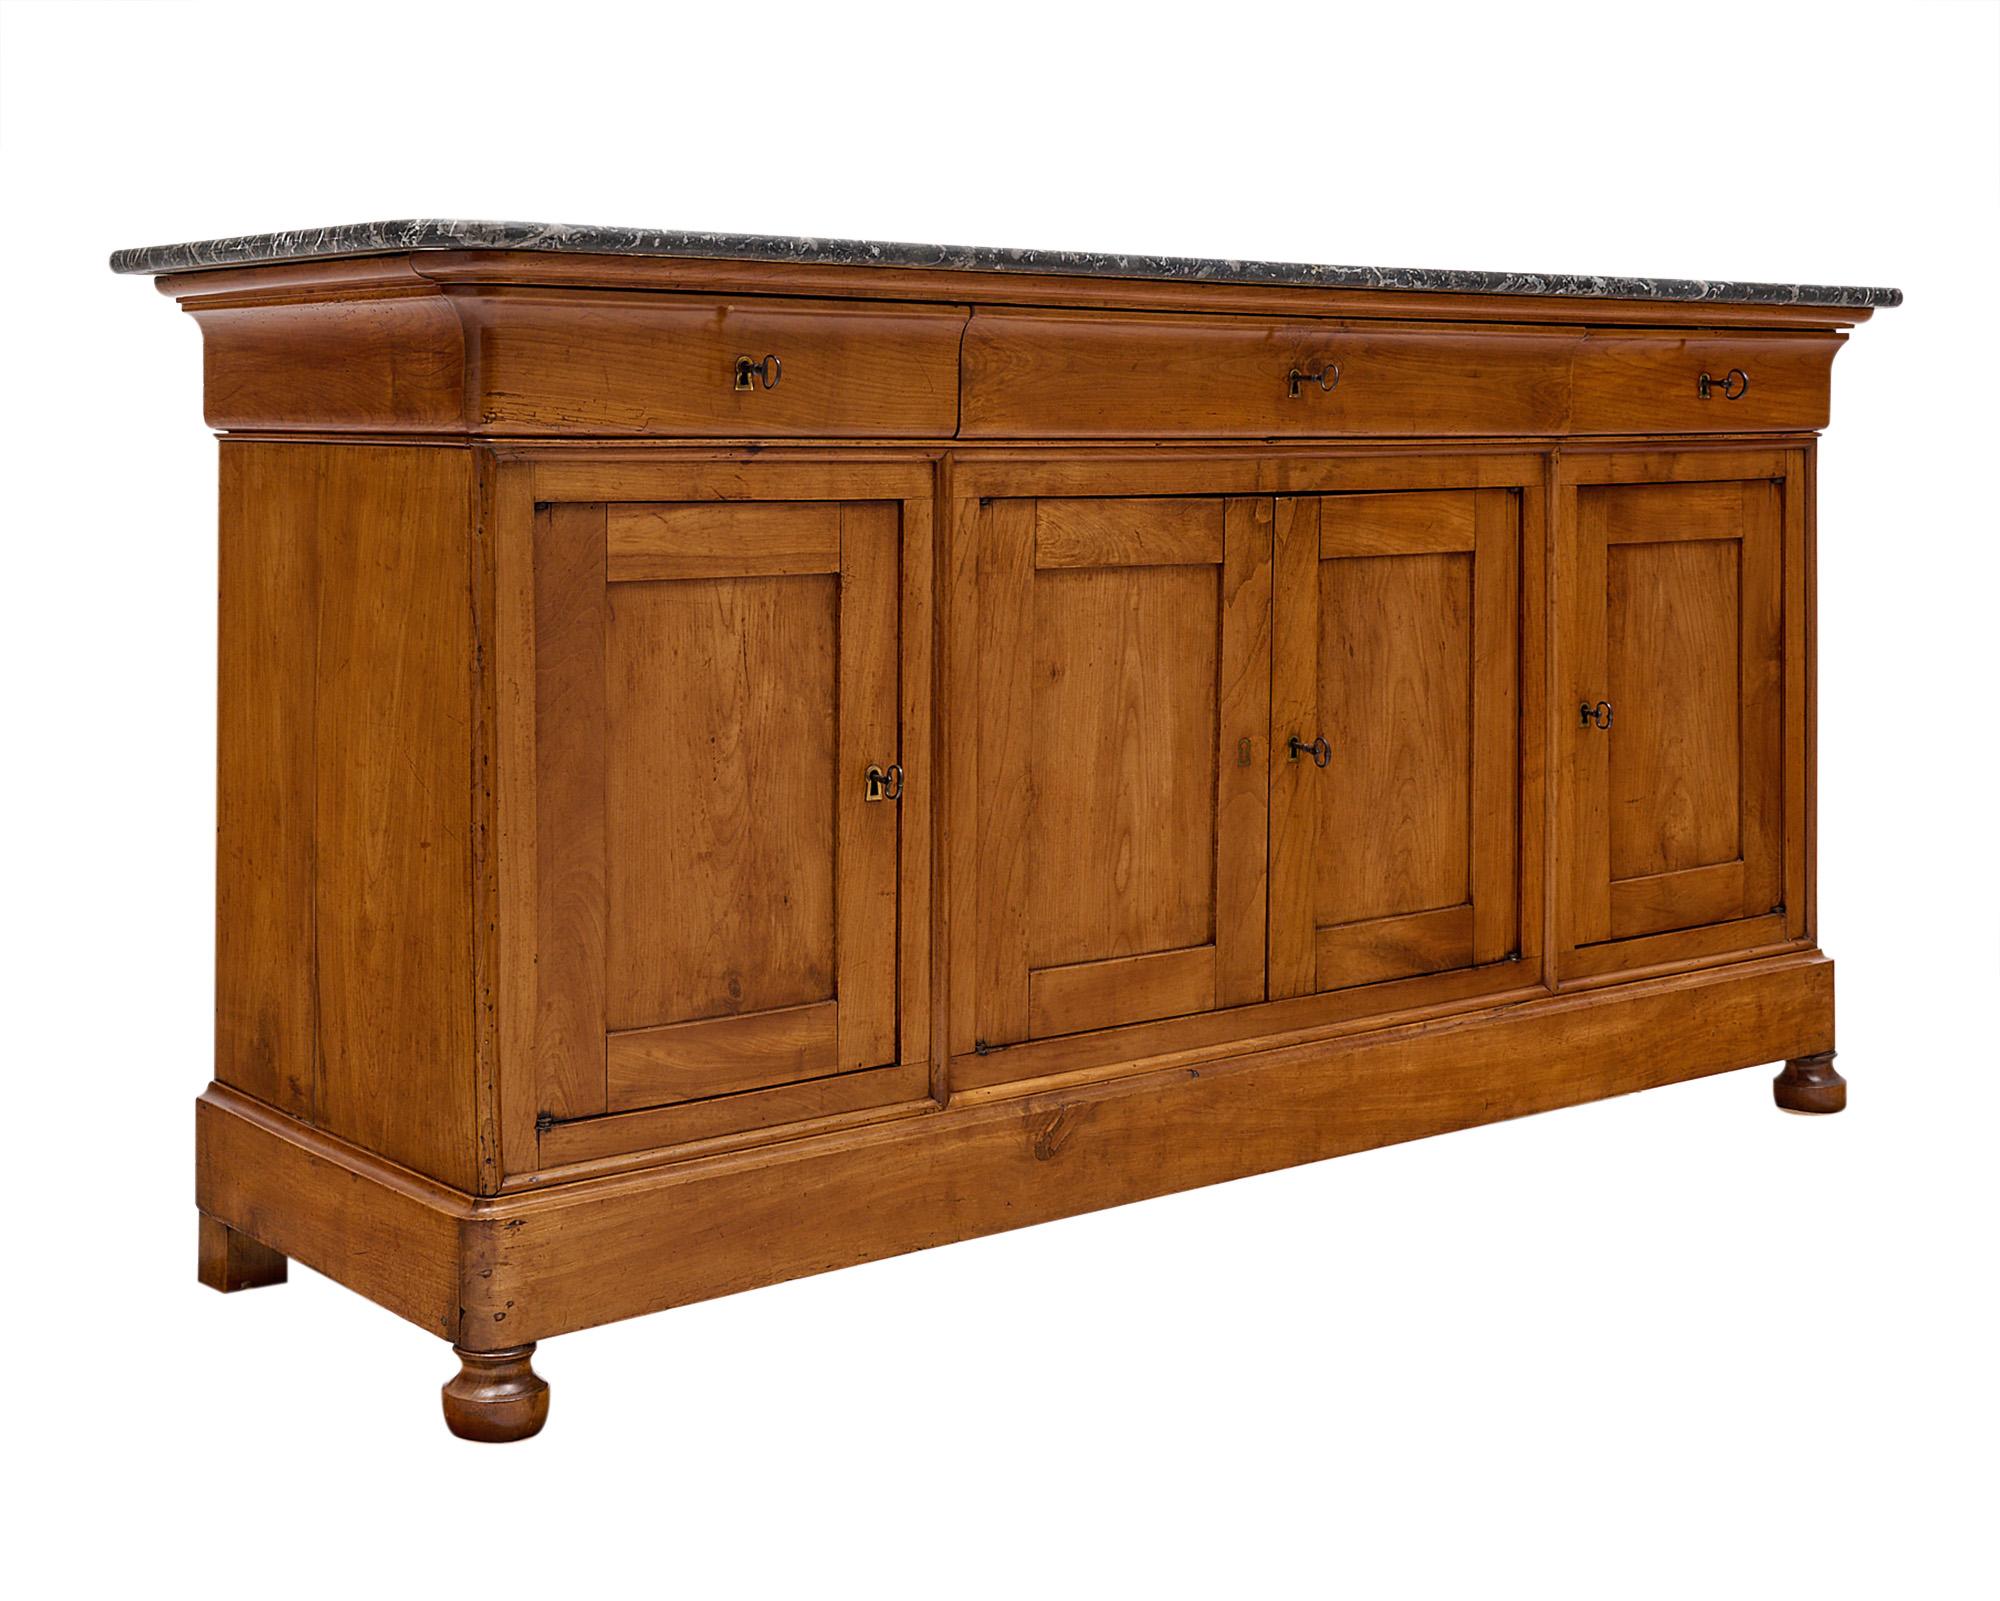 Buffet/enfilade, French, made of solid elm, from the Restauration period. Three dovetailed drawers with original locks and working keys sit atop four doors that open up to an interior shelf. The period credenza features finely hand carved trims